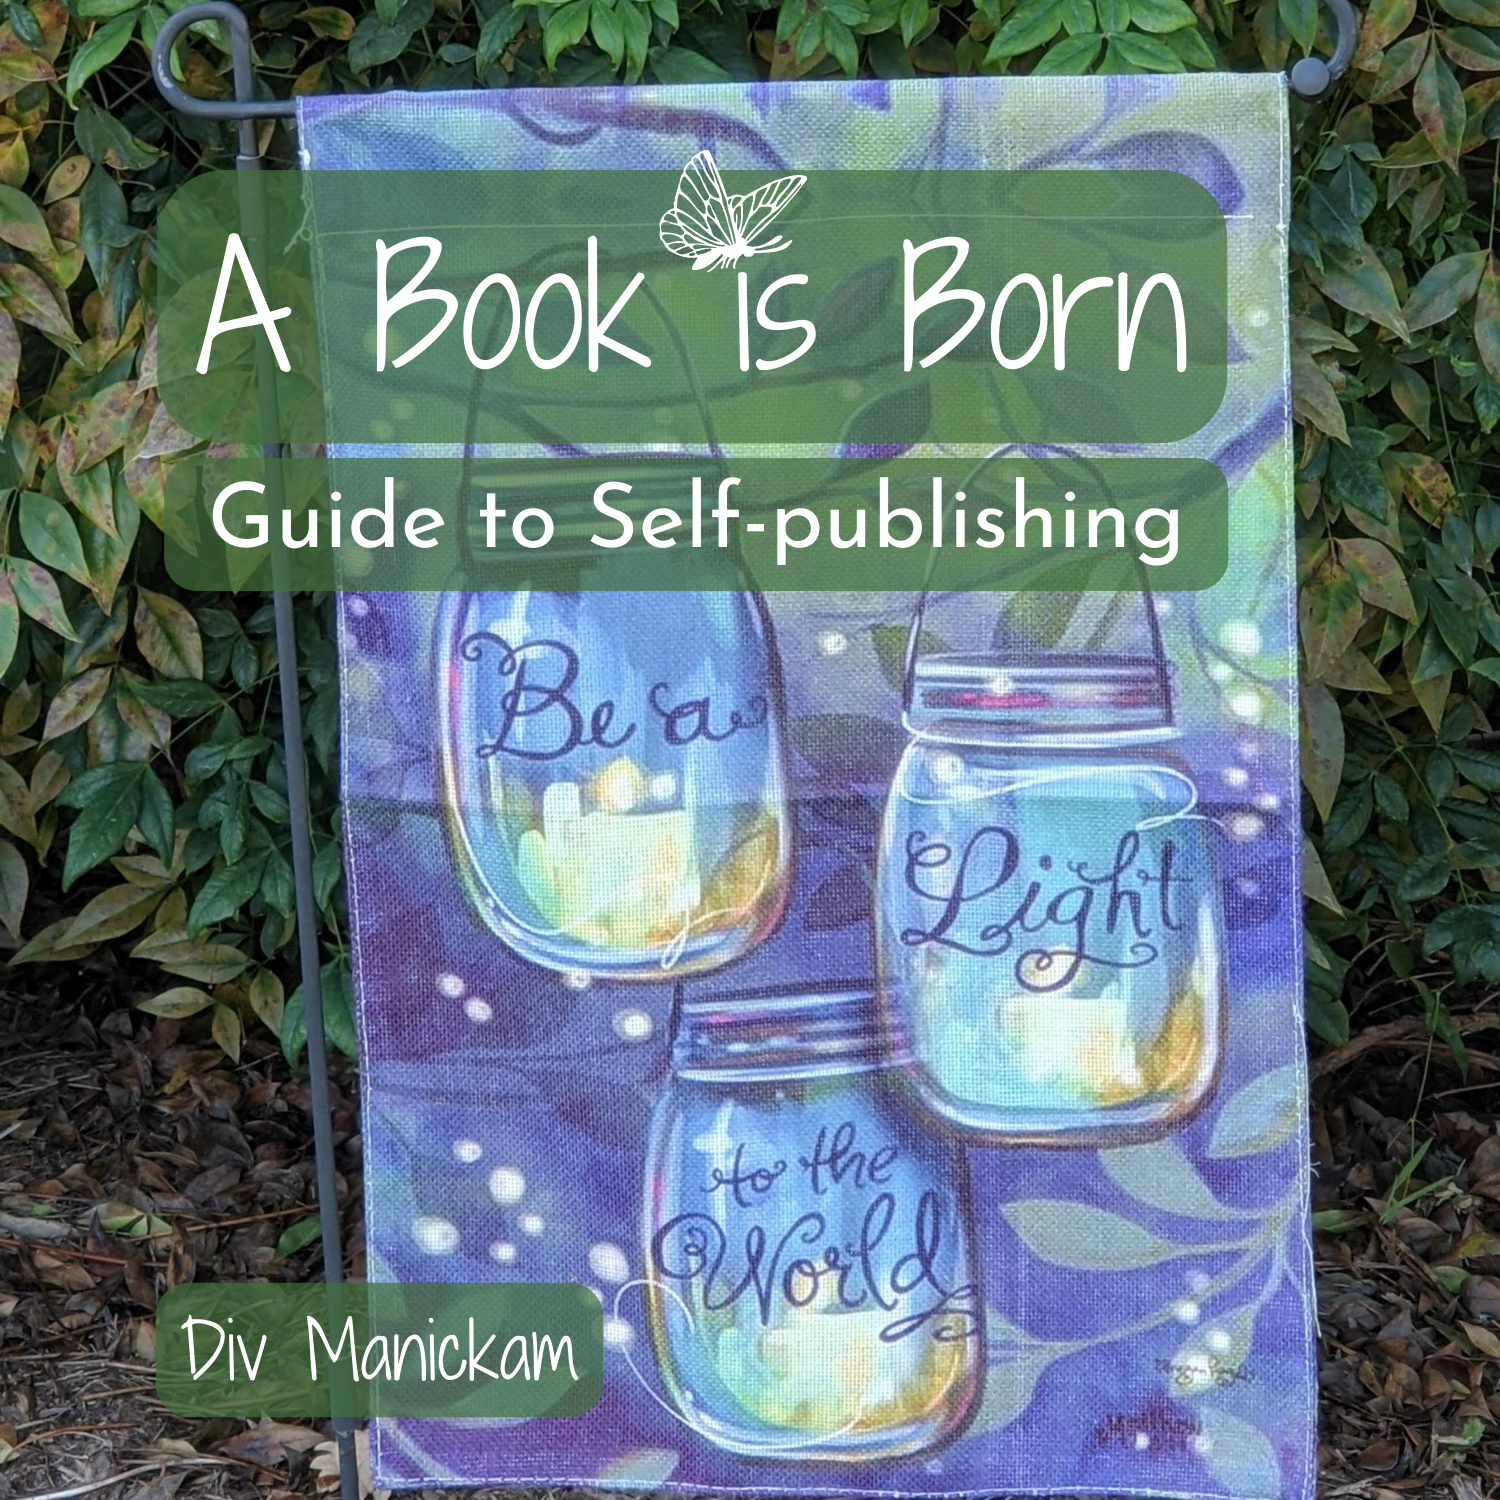 [Book] A Book is Born: Guide to Self-publishing